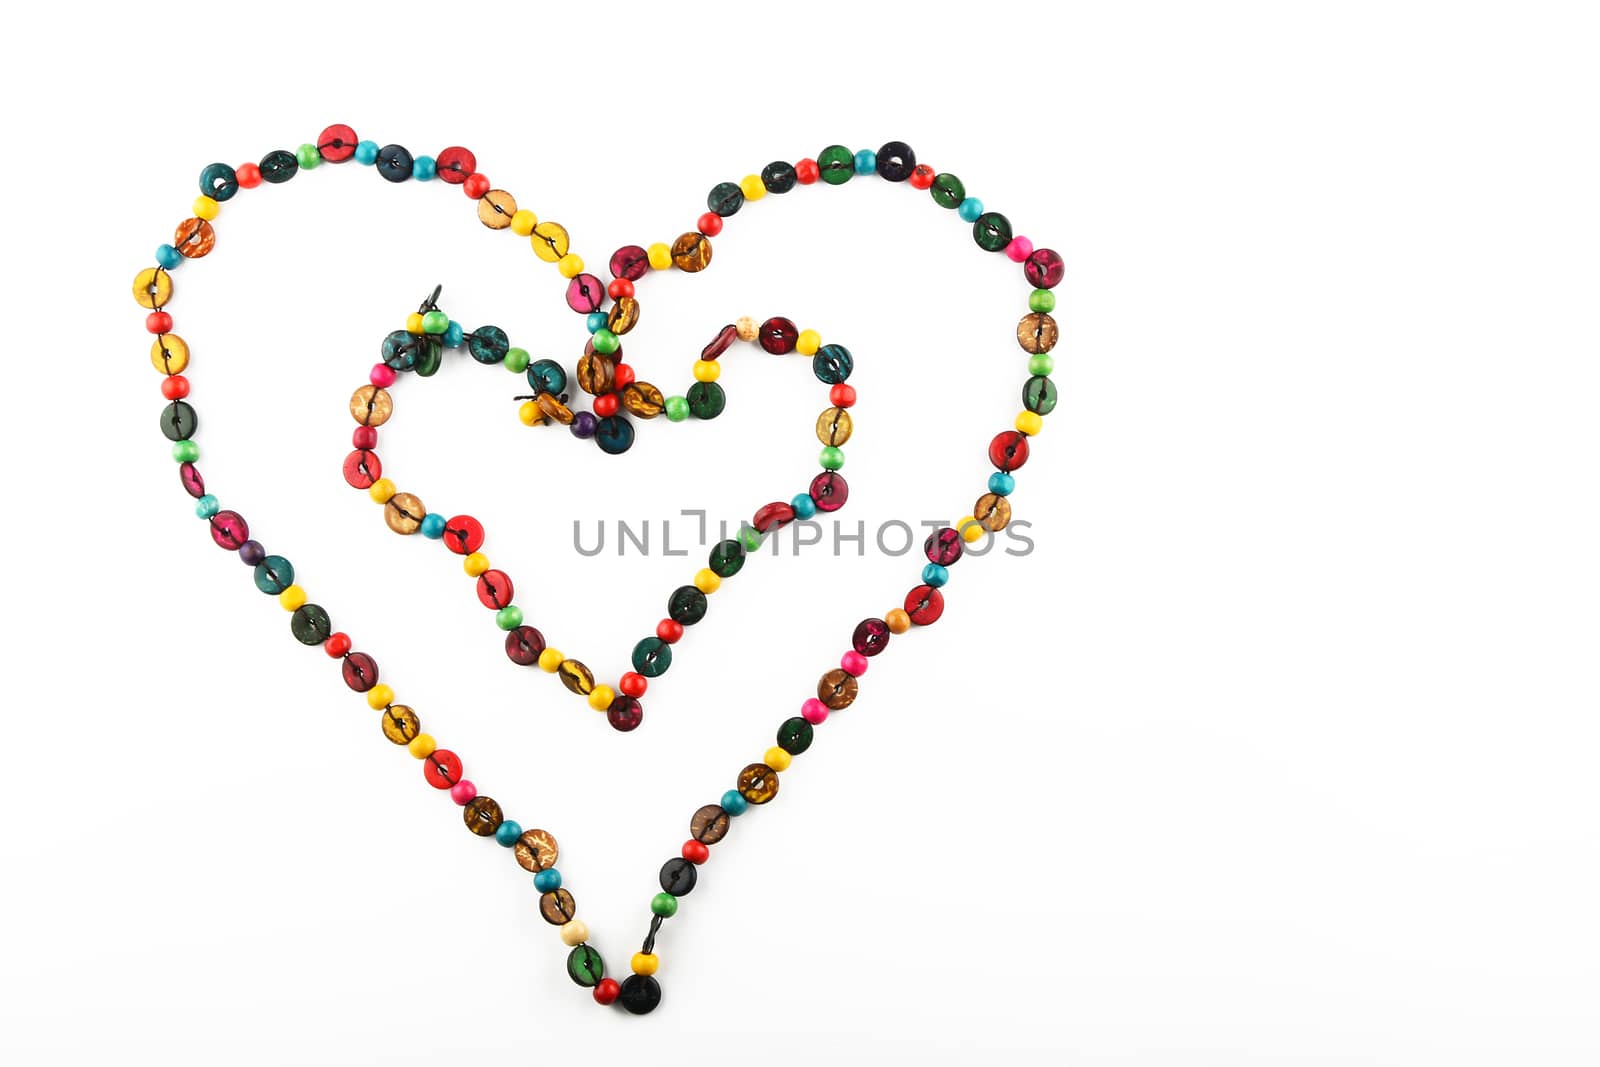 Double heart shaped colorful handmade wooden round beads necklace isolated on white